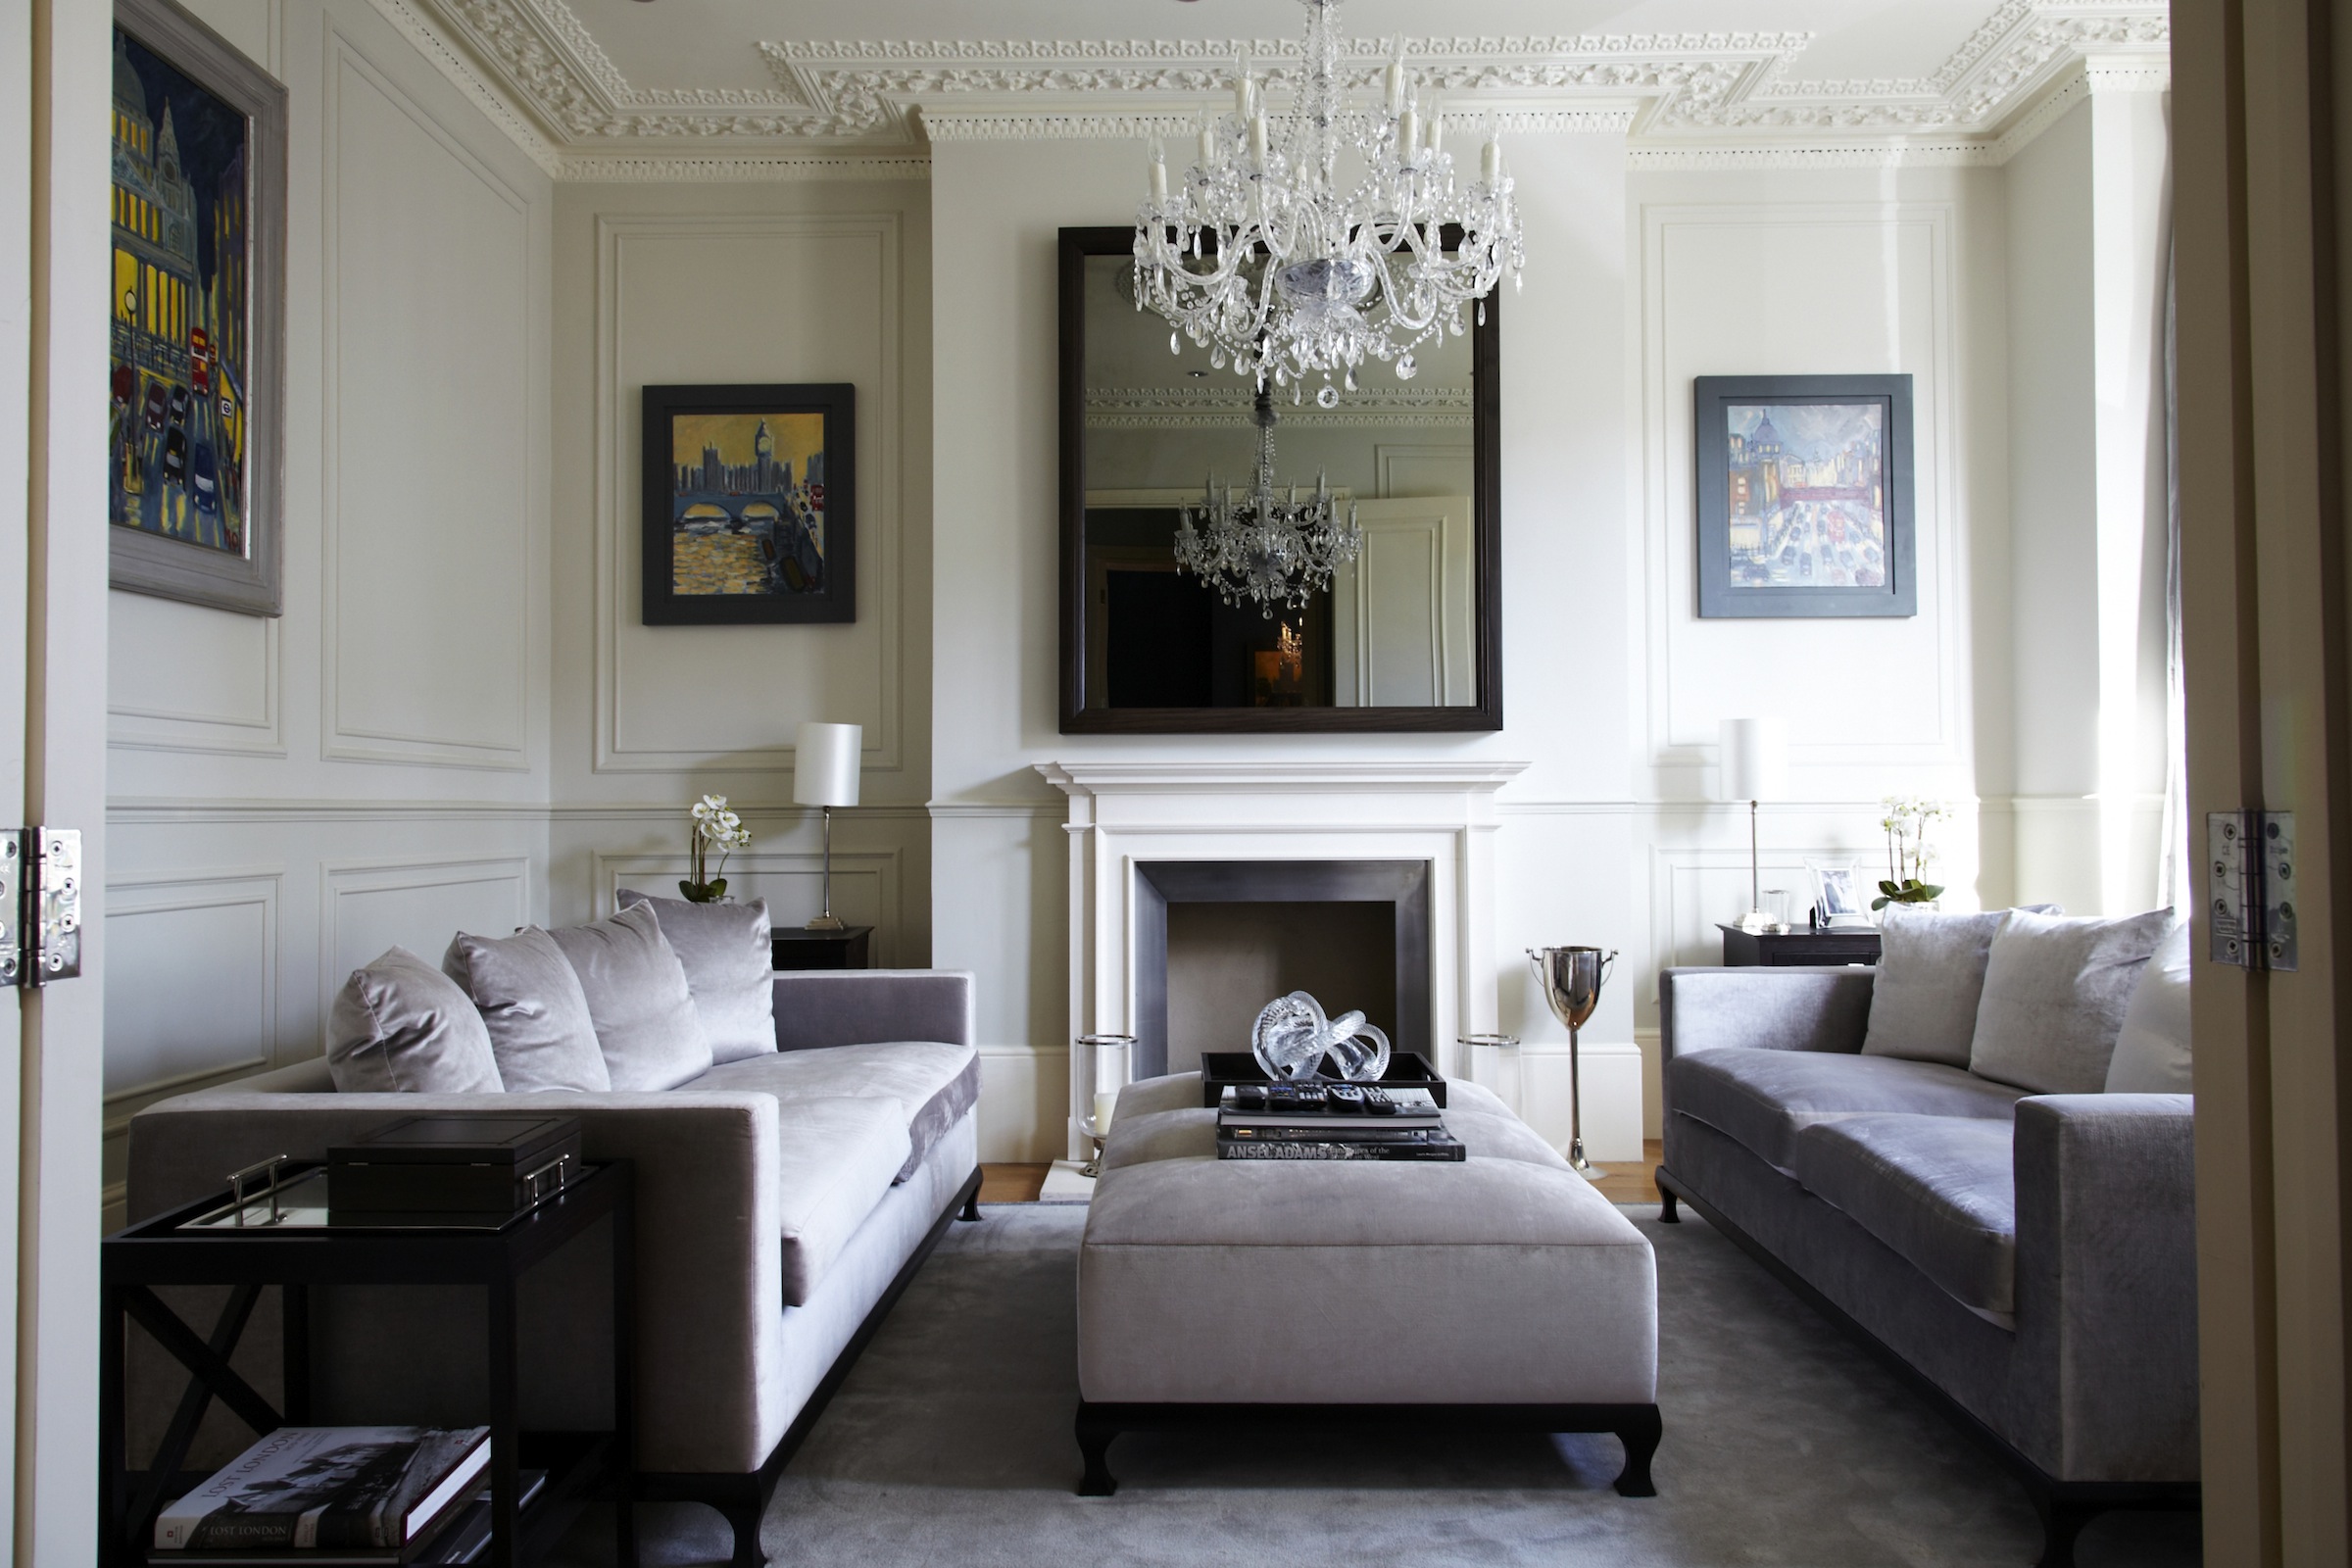 Modern Victorian Interior Design Ideas: Timeless Elegance And Classic Charm